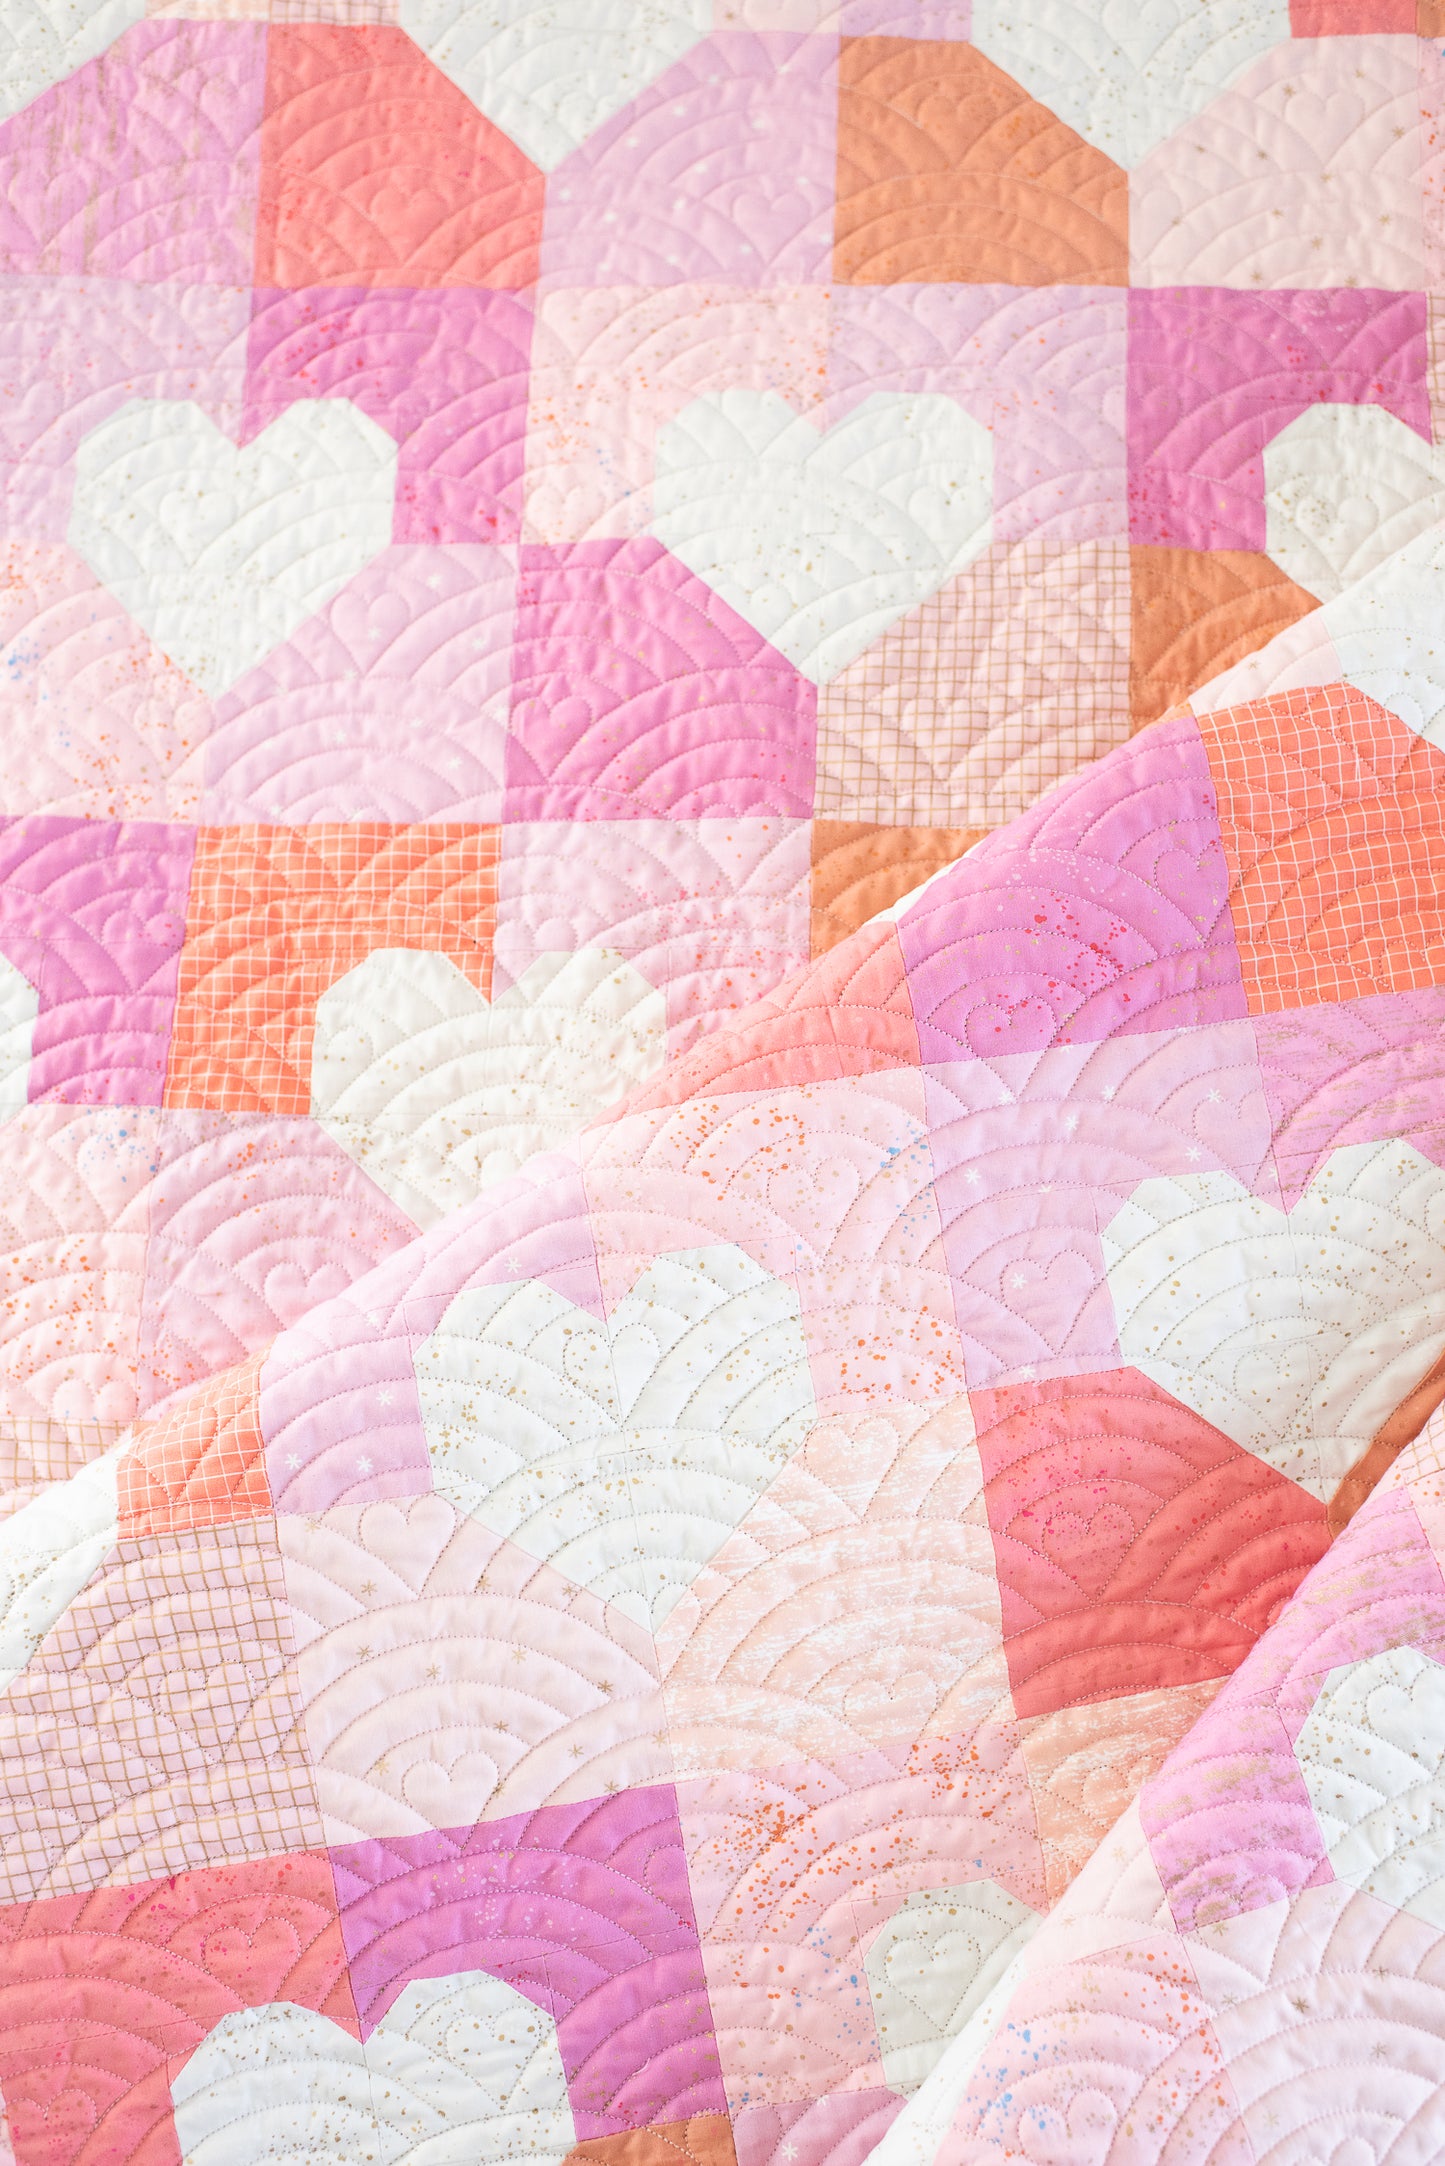 Patchwork Hearts PDF Quilt Pattern-Automatic Download